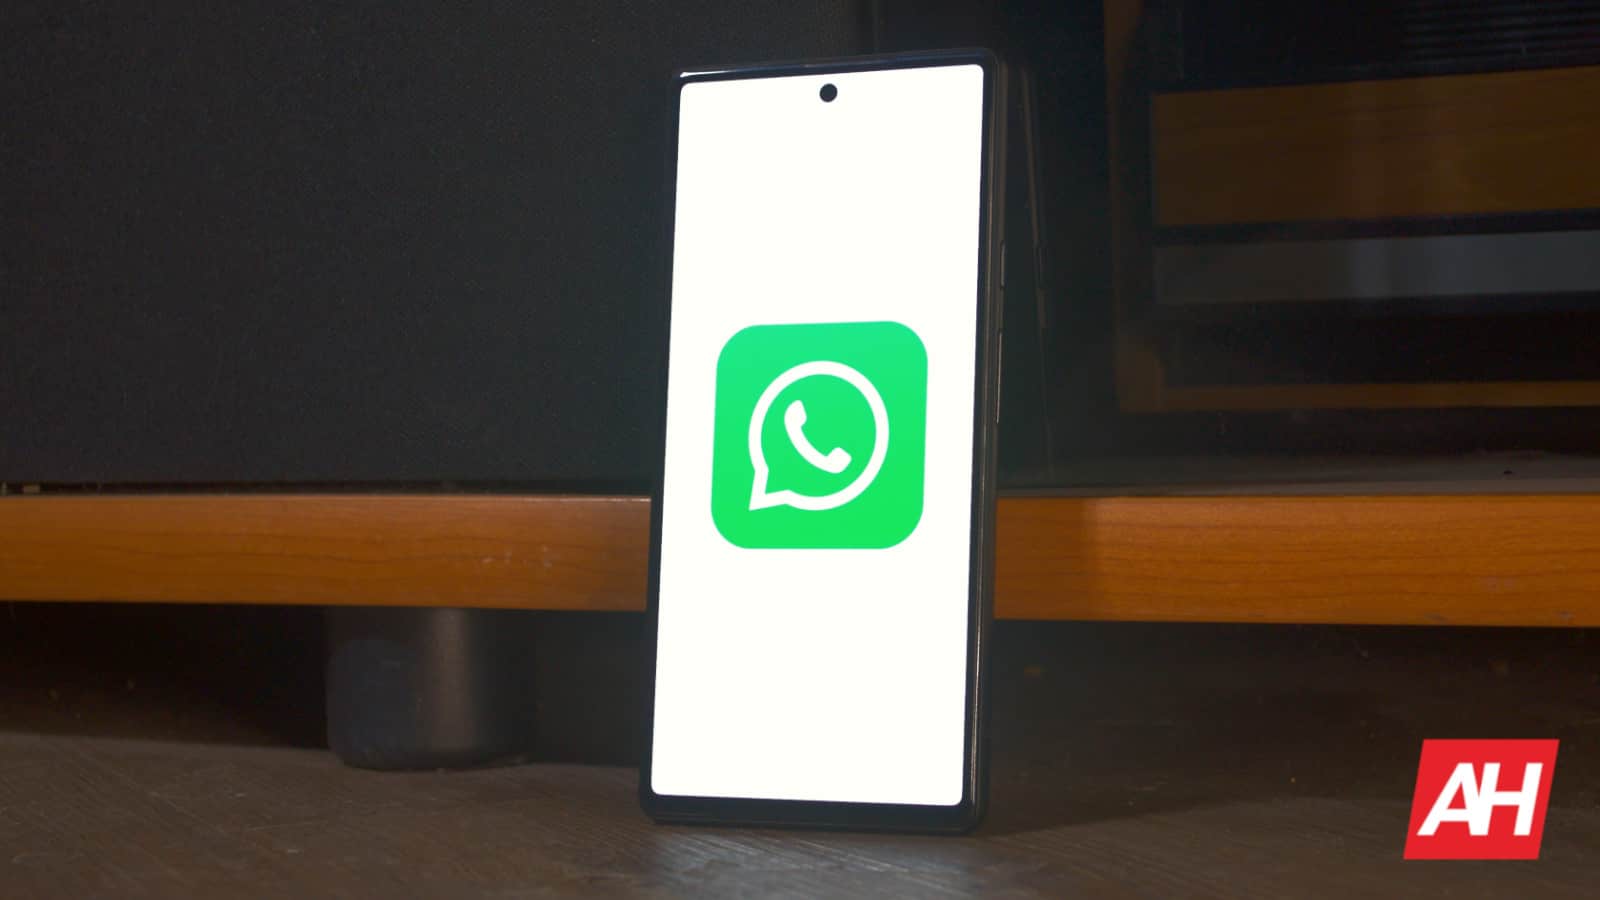 WhatsApp is about to make screen sharing much better